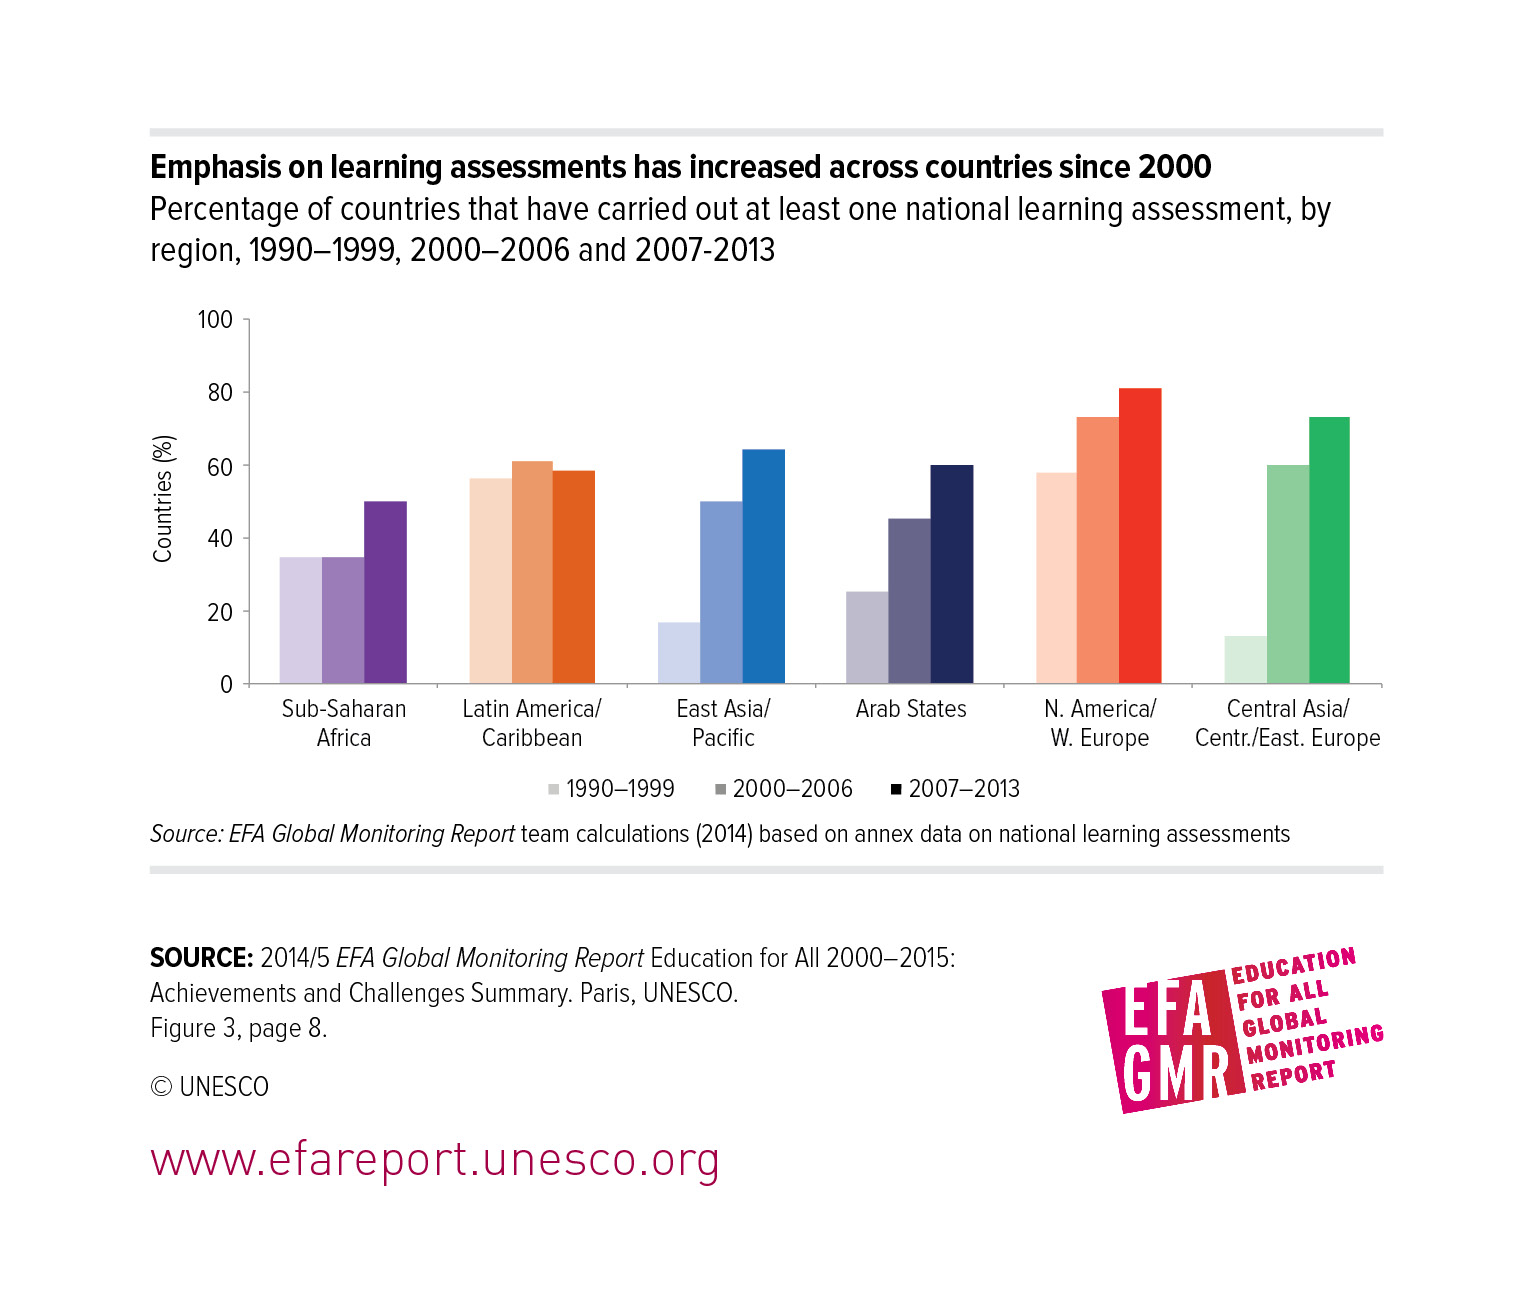 Emphasis on learning assessments has increased across countries since 2000